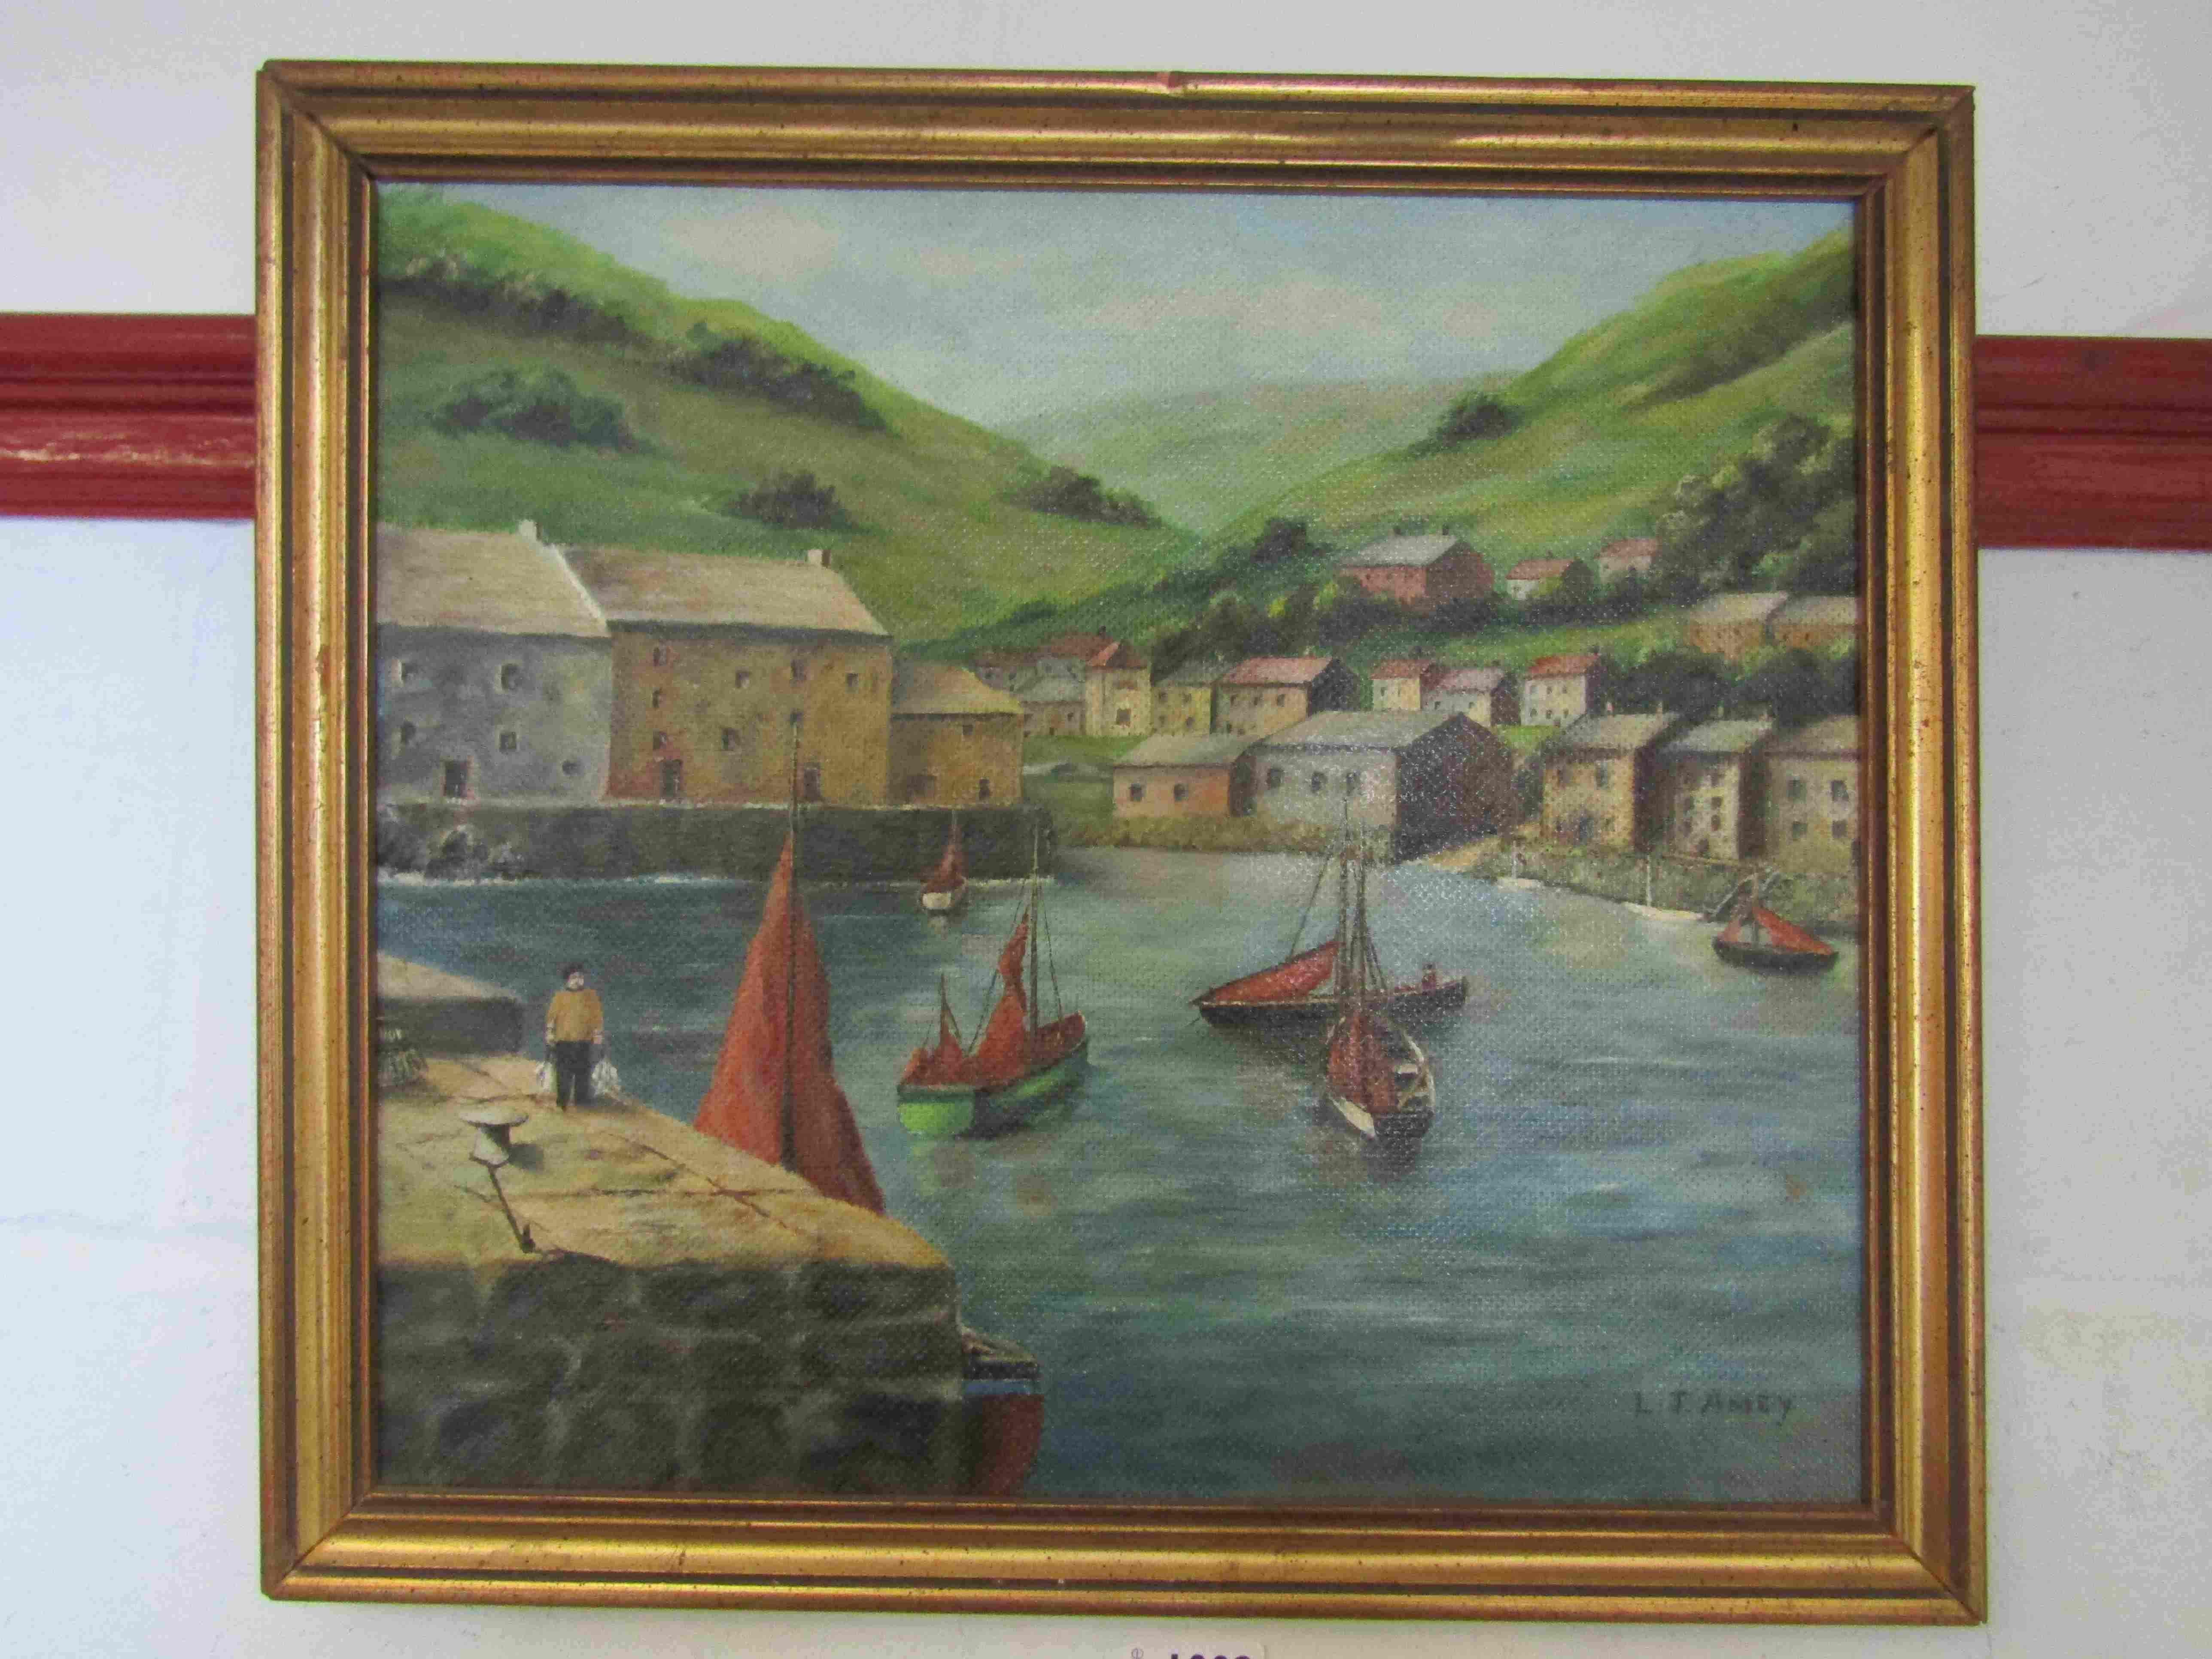 Oil on board, The Harbour at Polperro (Cornwall) by L T Amey, signed lower right, title verso,